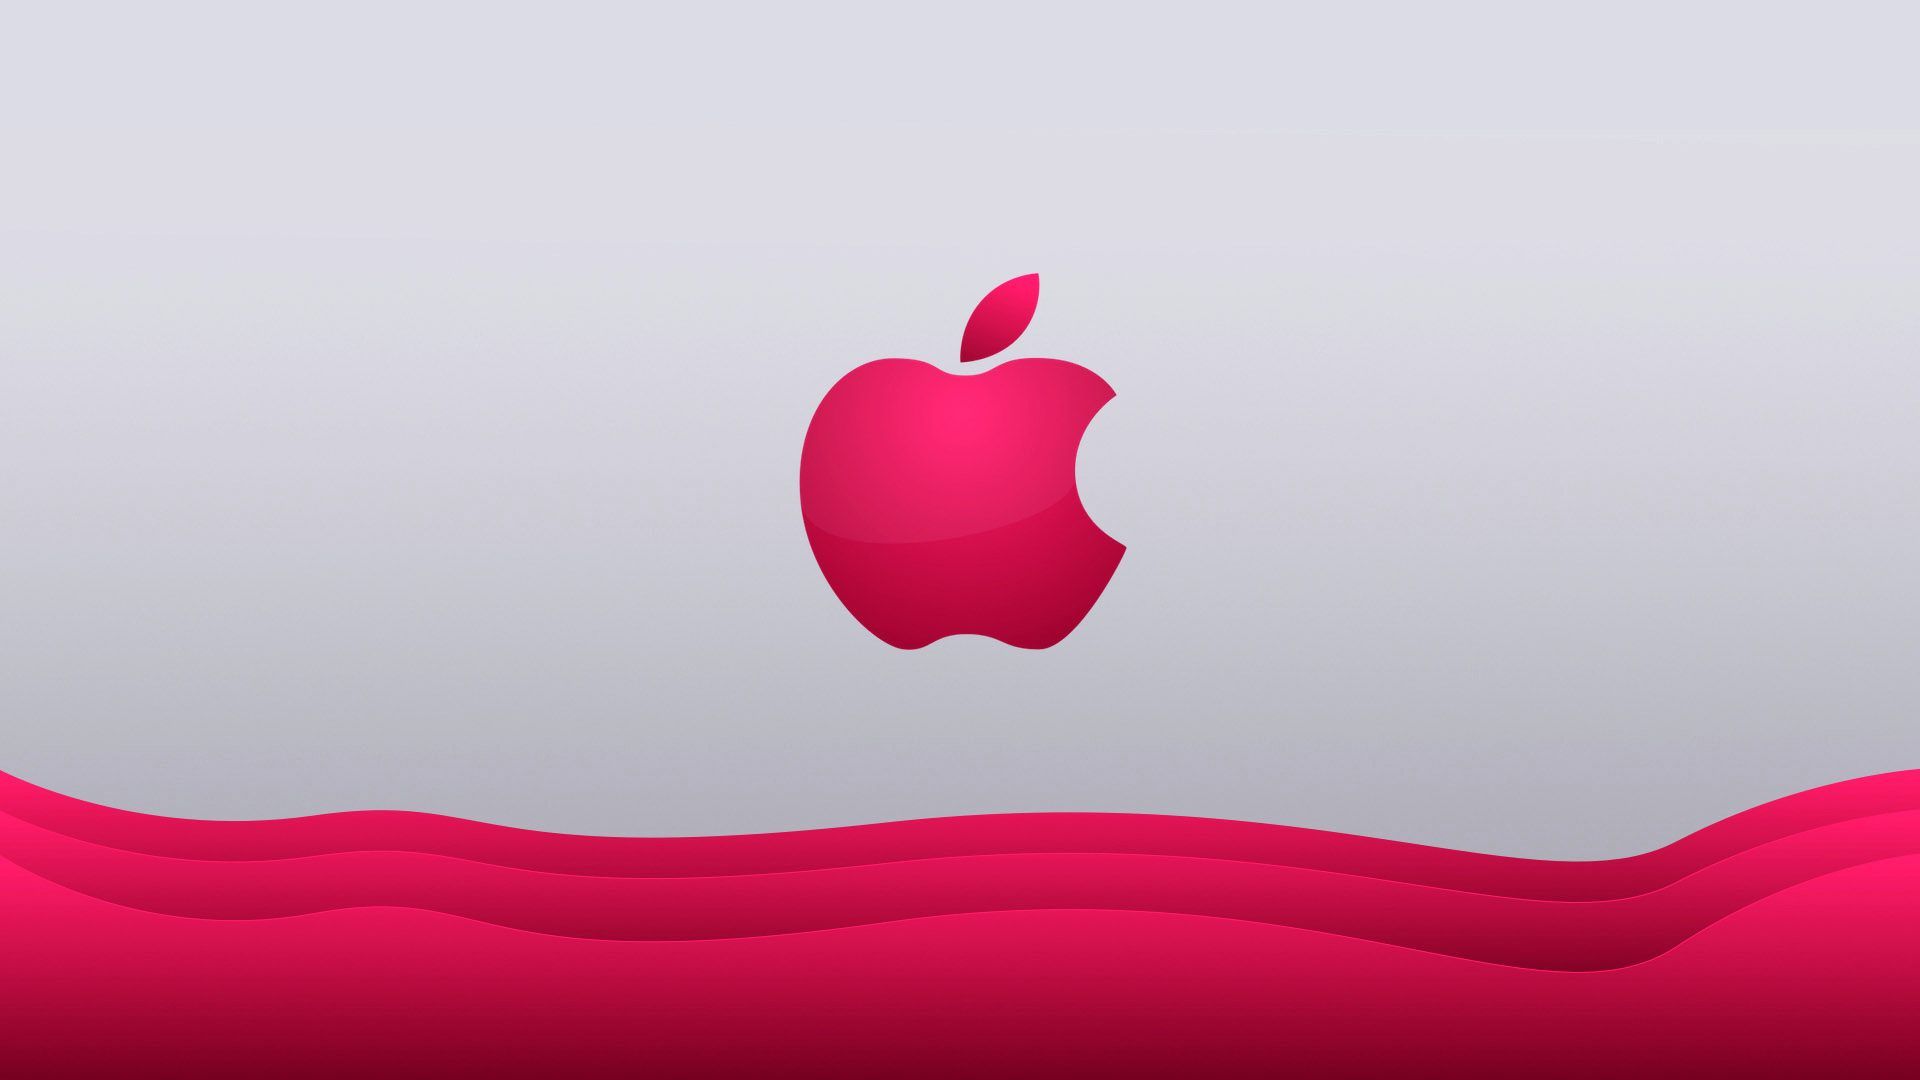 Apple Pink Best Quality Wallpaper Pic Wsw2054331 Apple Logo Wallpaper Pink